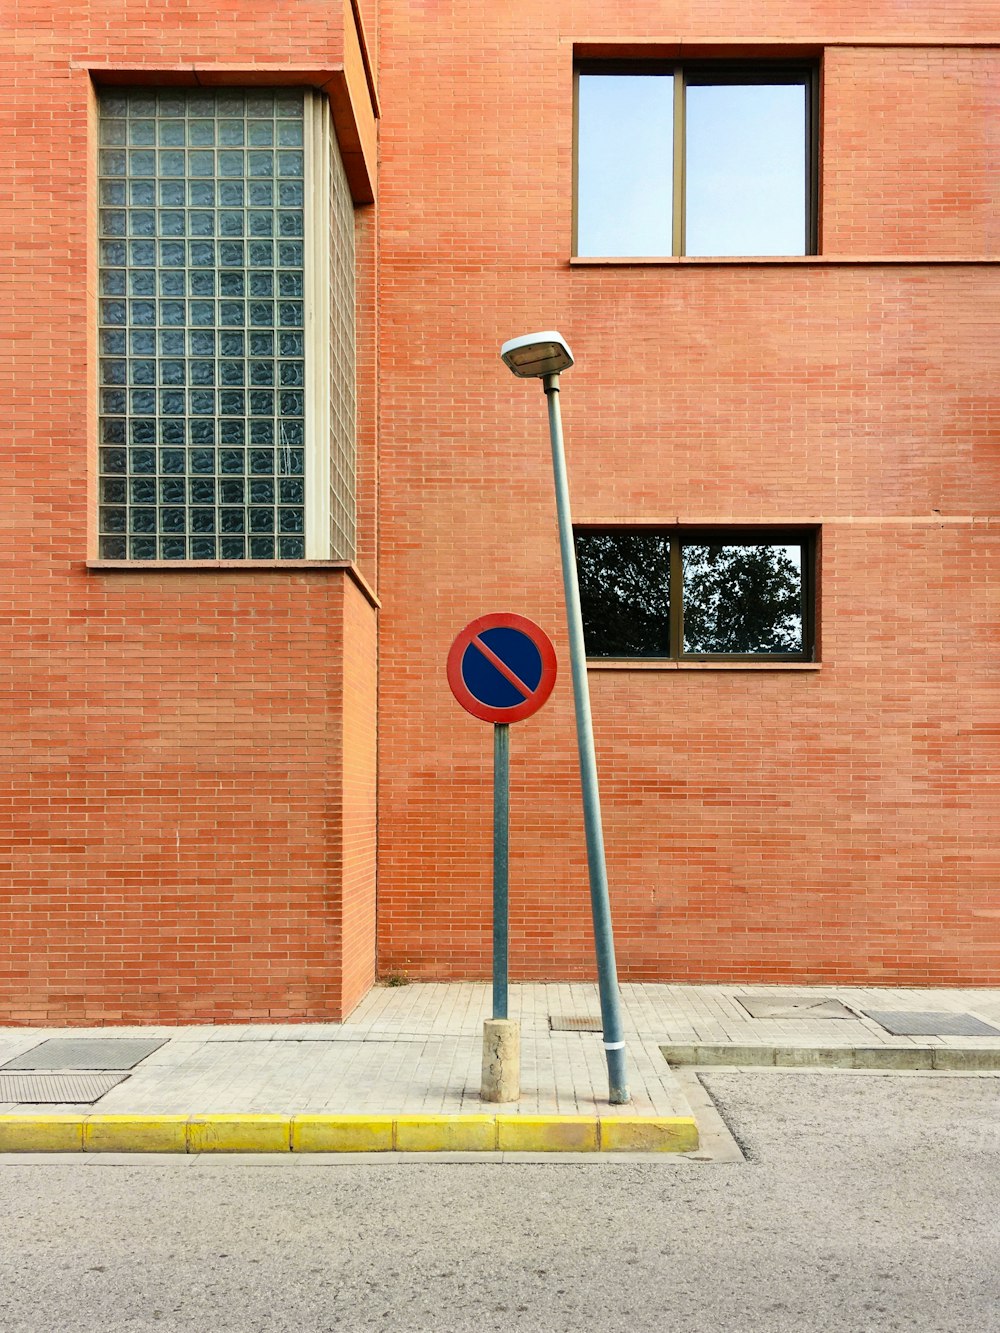 a no parking sign in front of a brick building